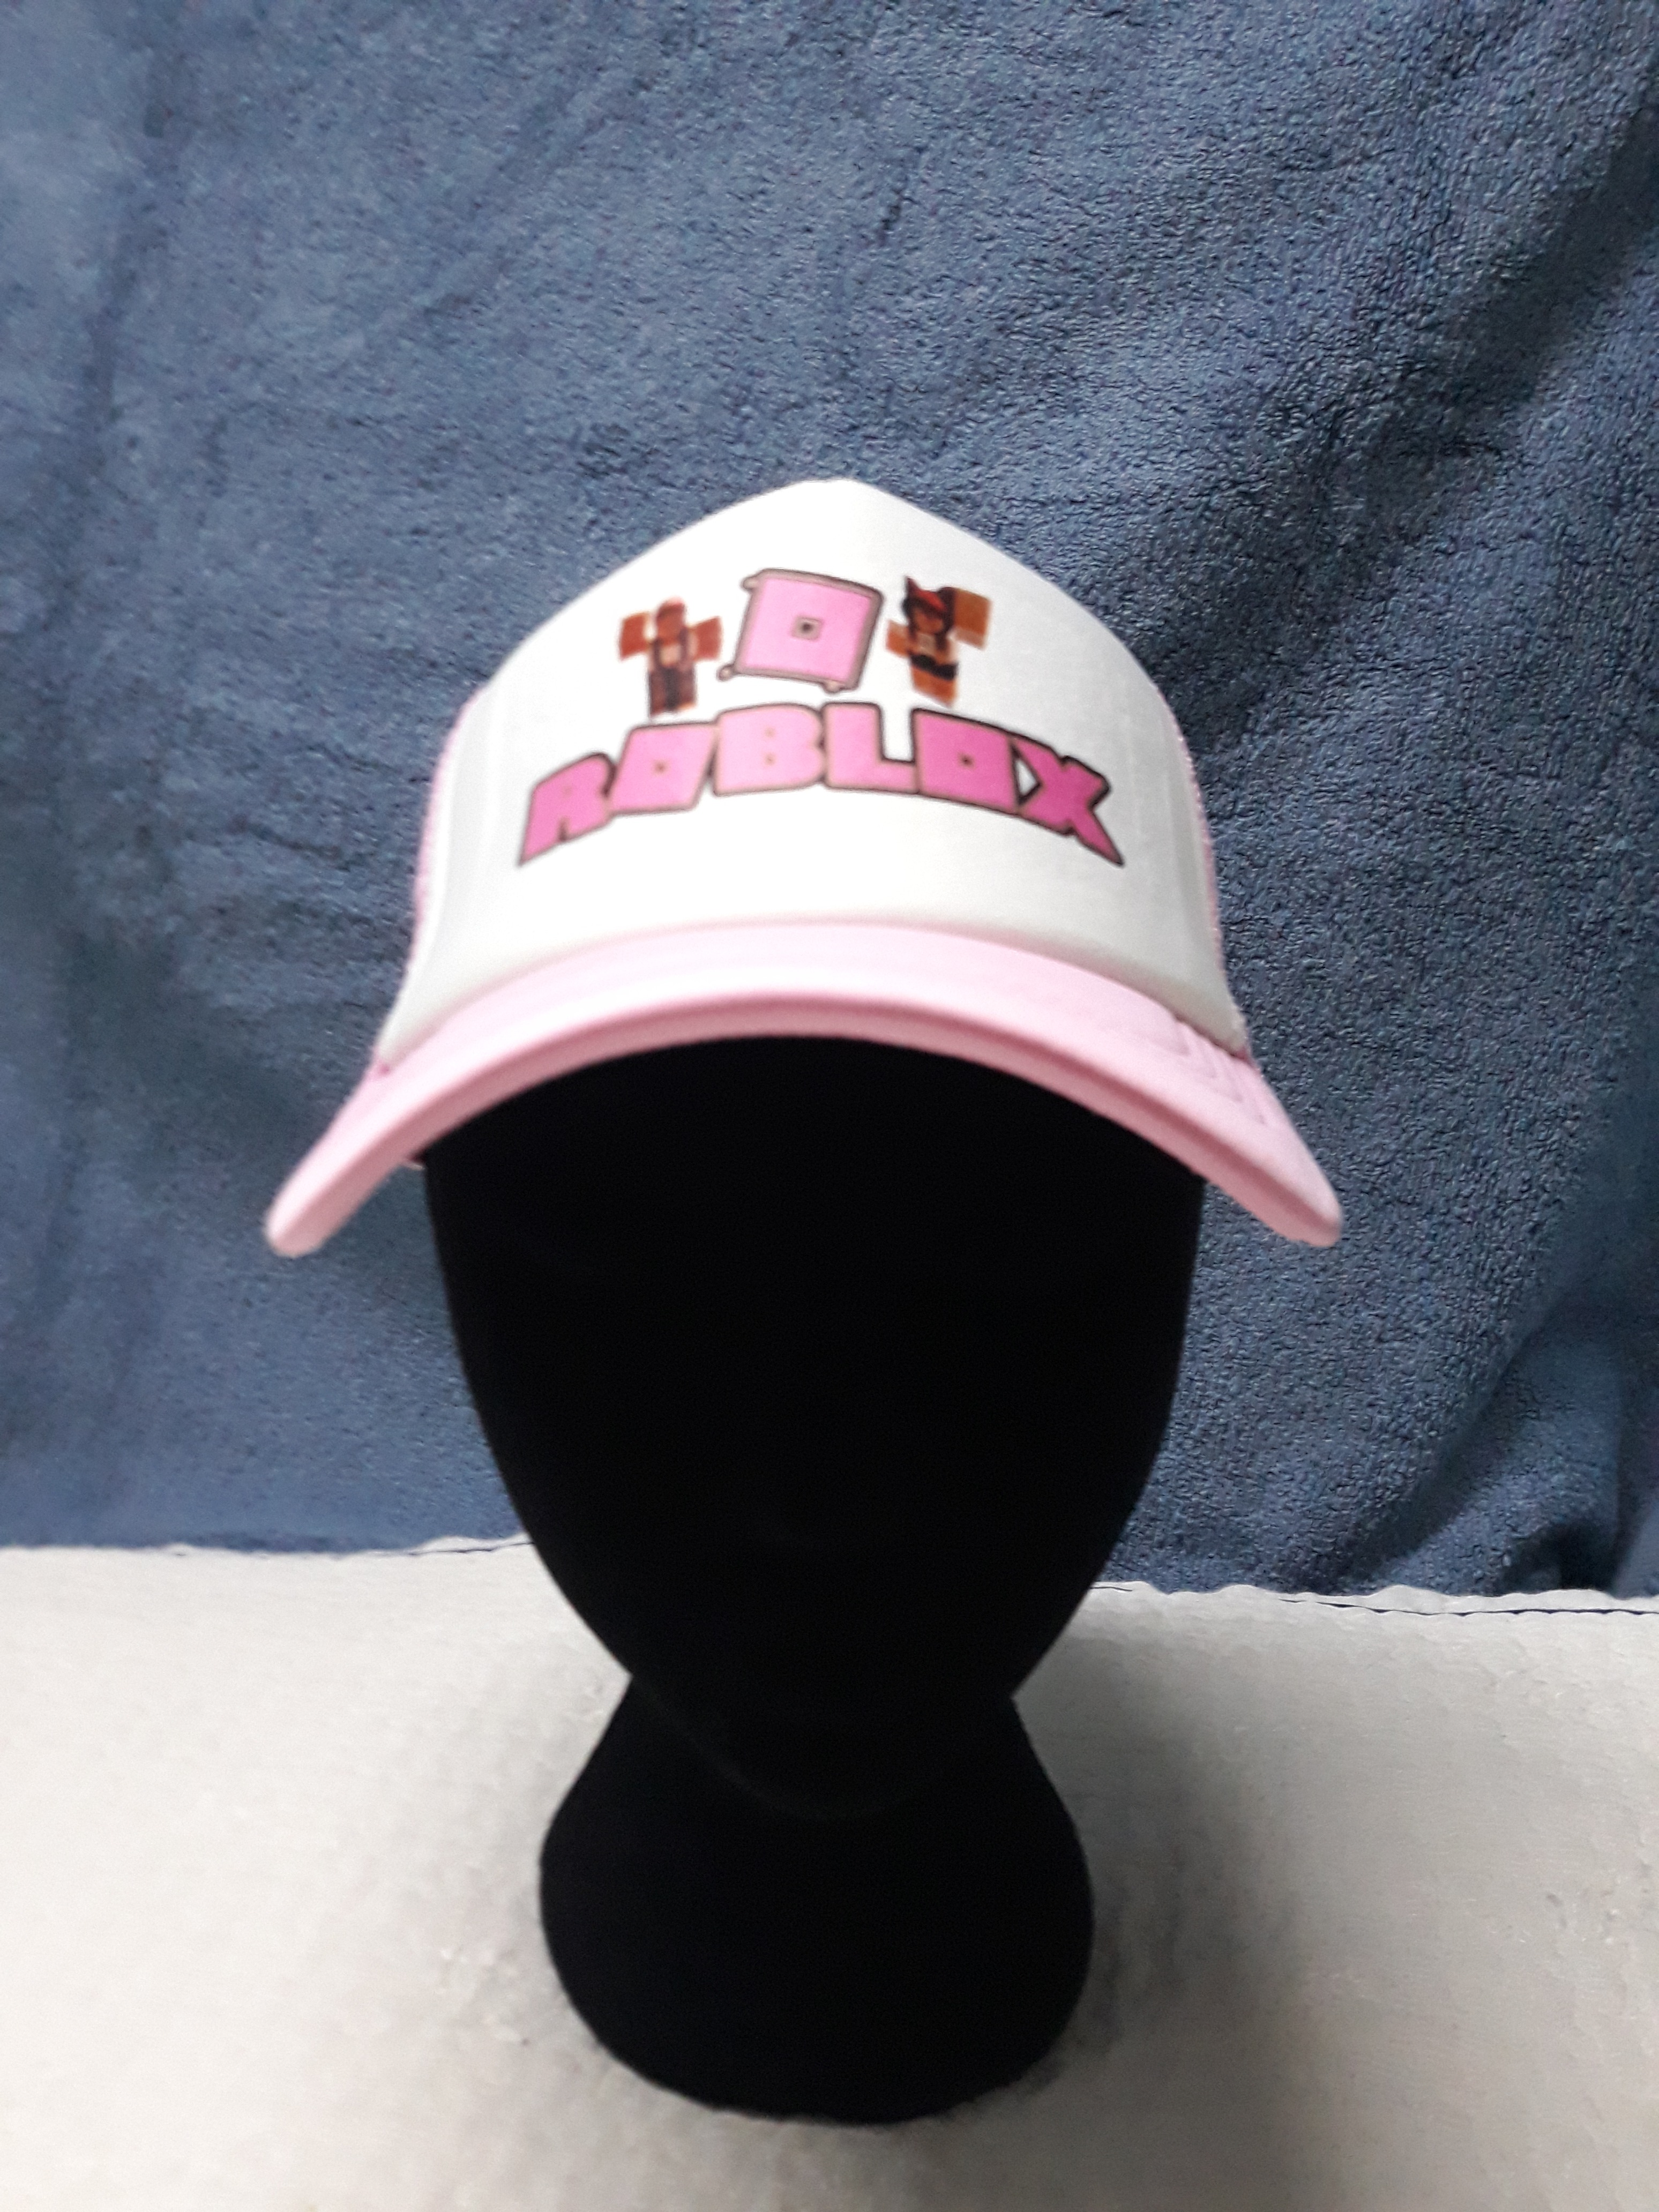 Roblox Cap Pink Buy Sell Online Hats Caps With Cheap Price Lazada Ph - adjustable game roblox kids black pink cap boys girls cap